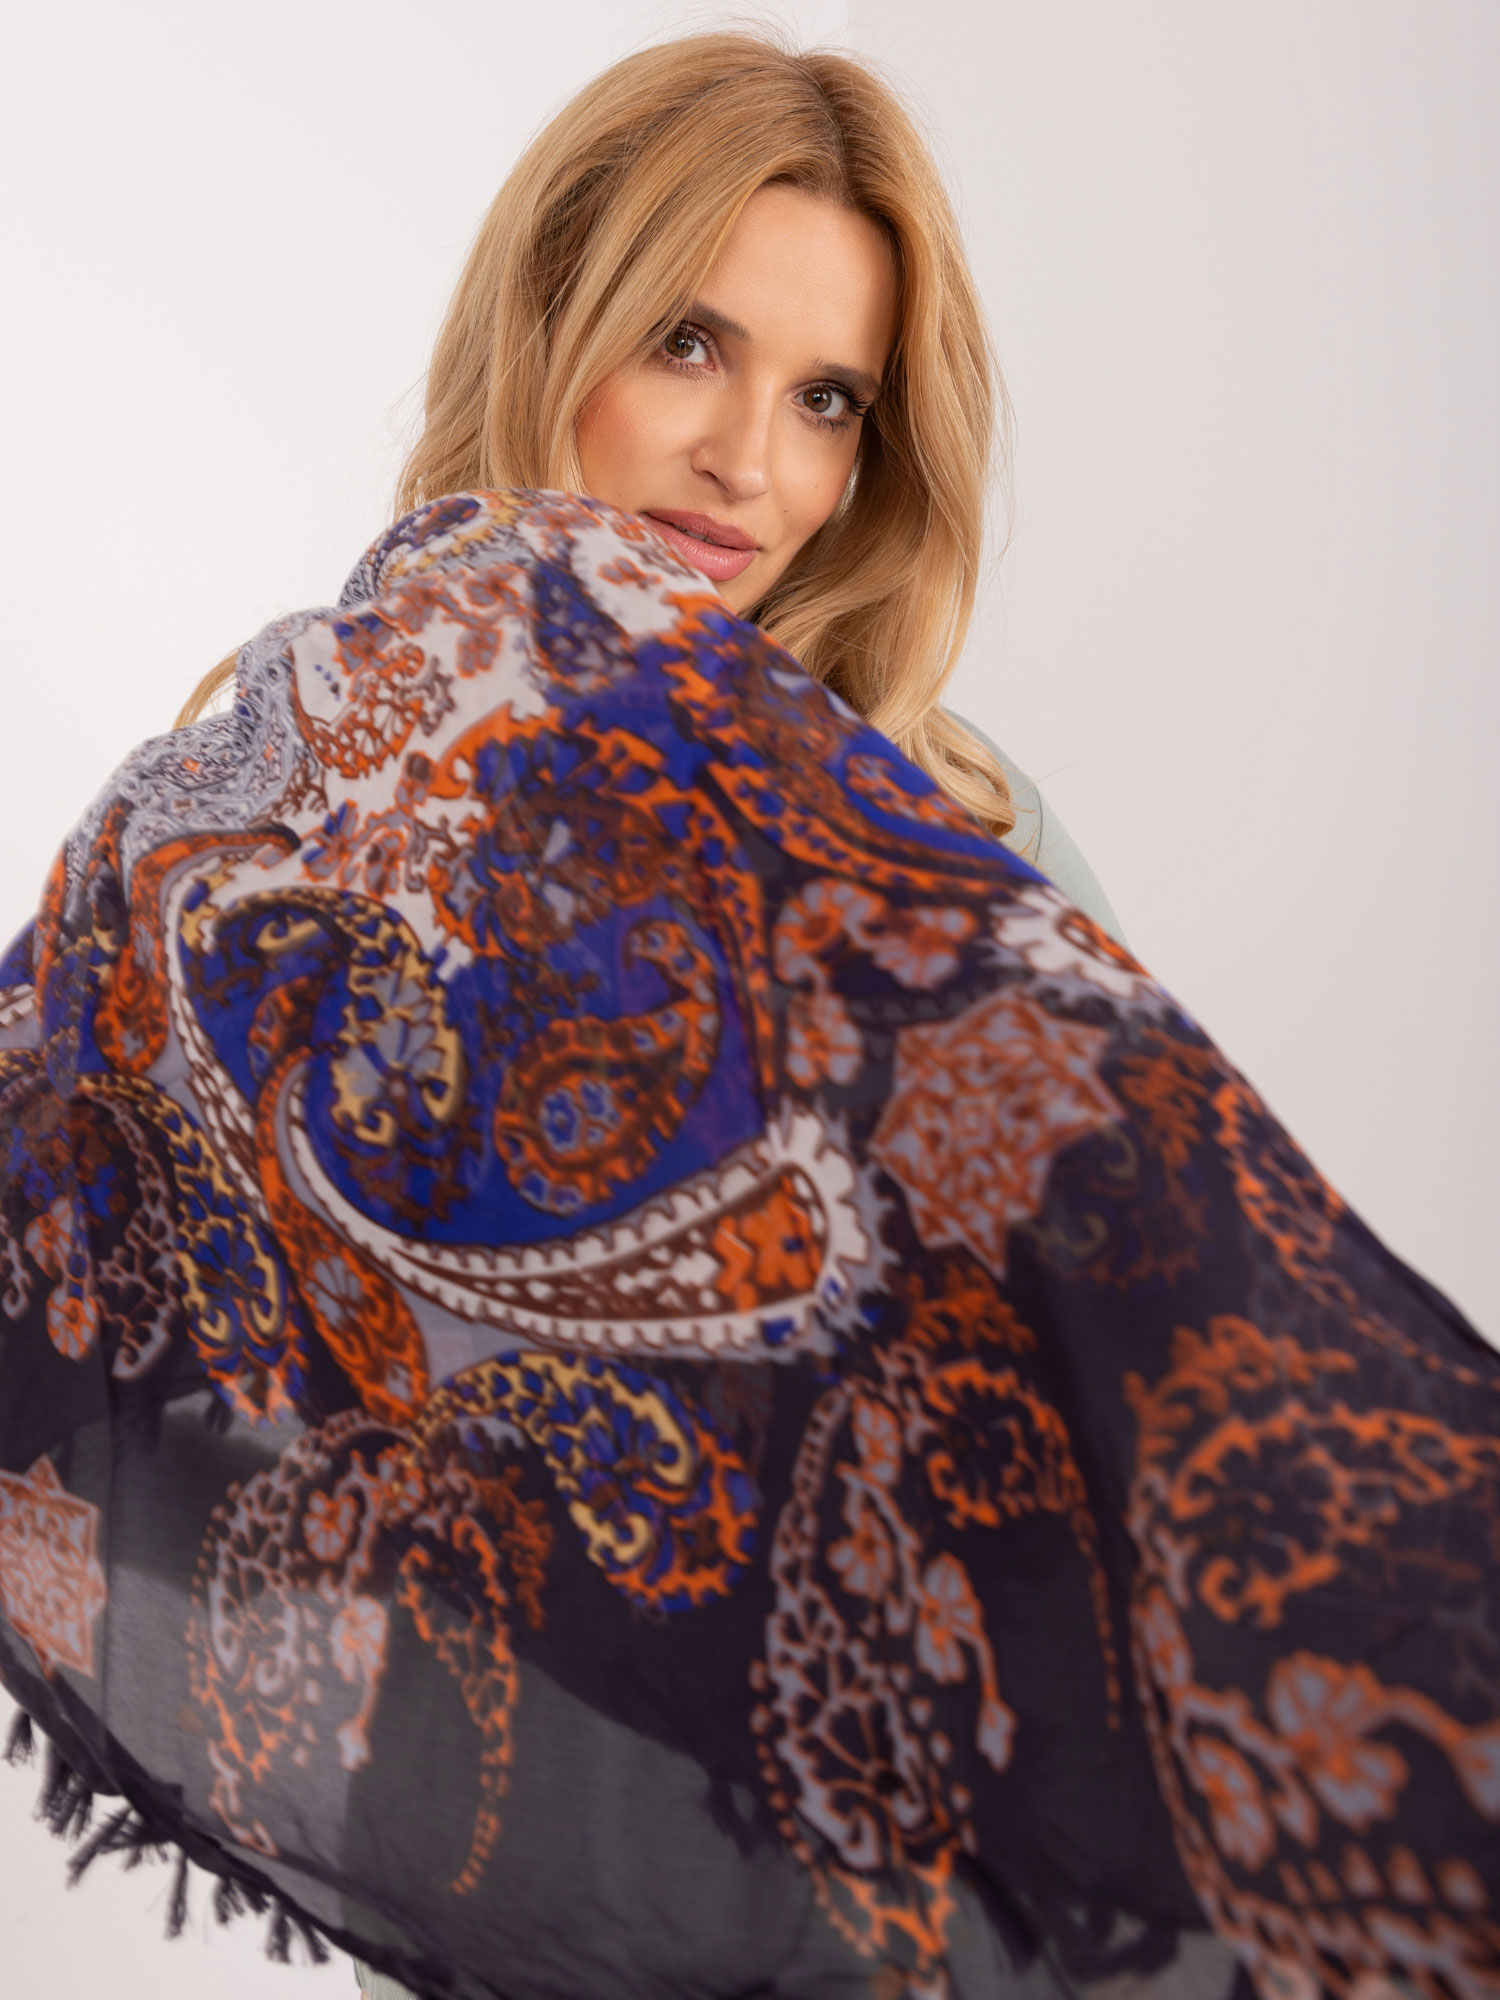 Navy Blue Silk Scarf with Patterns